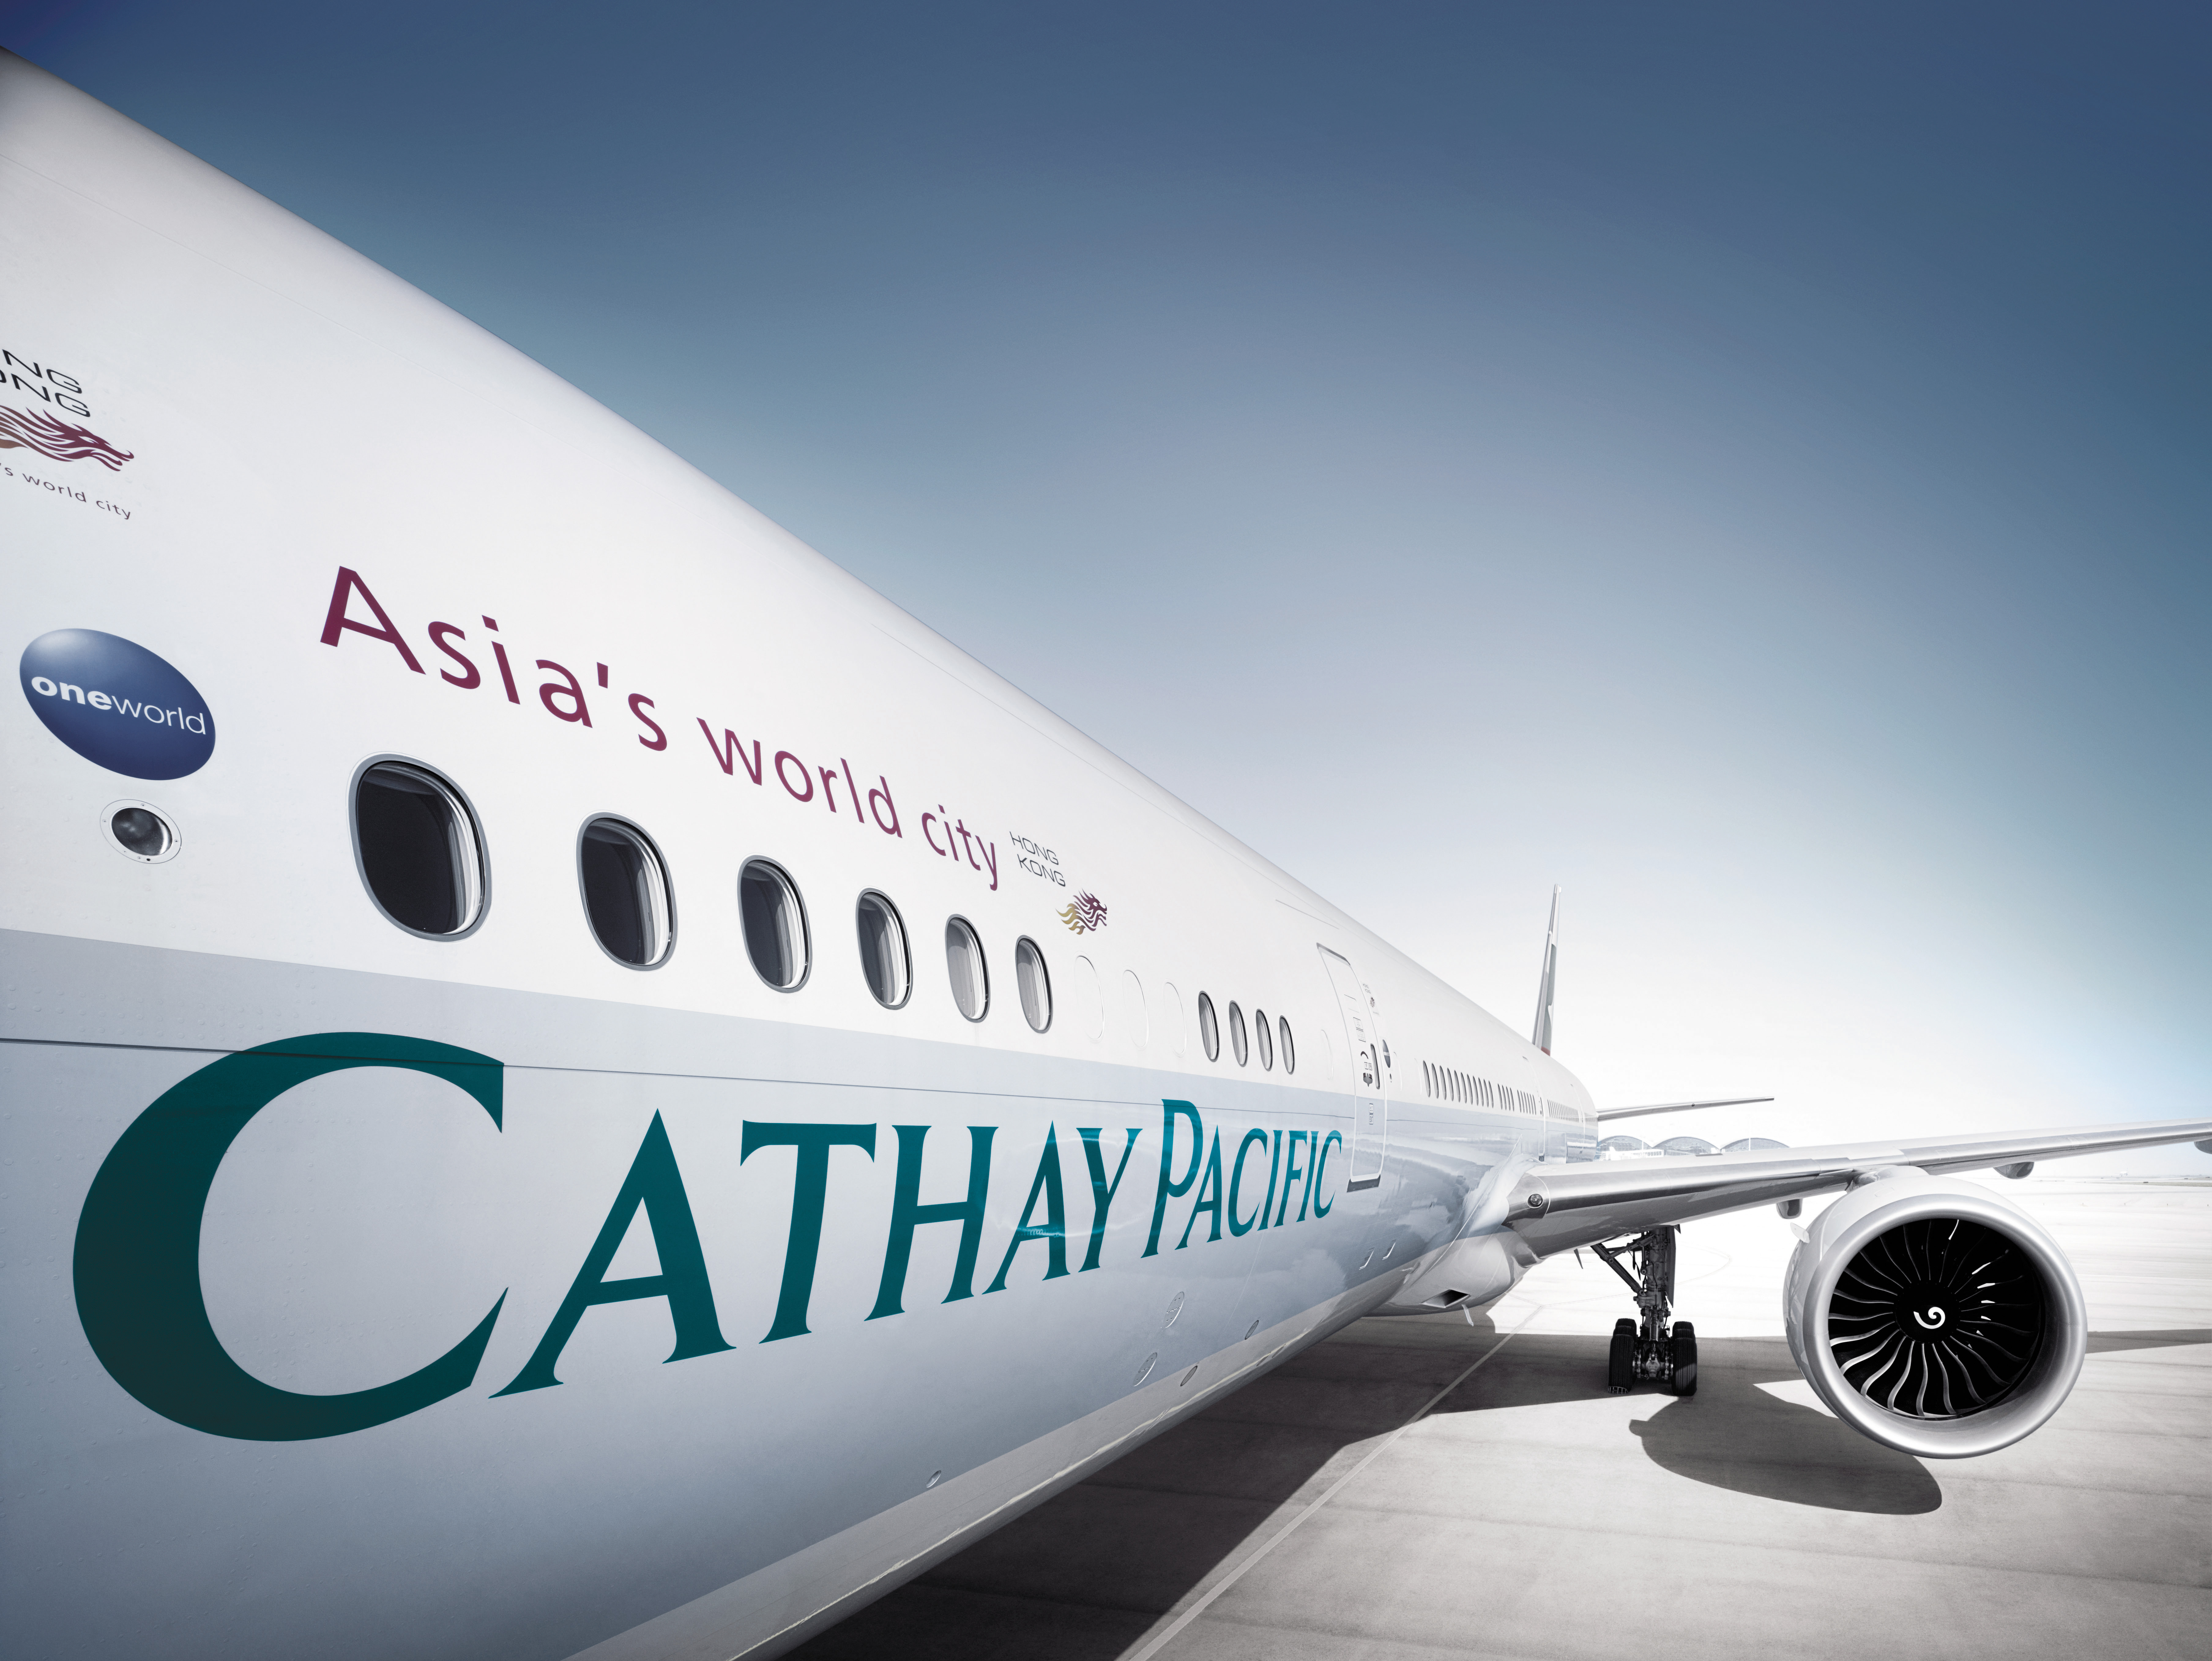 Business Class on Cathay Pacific Review